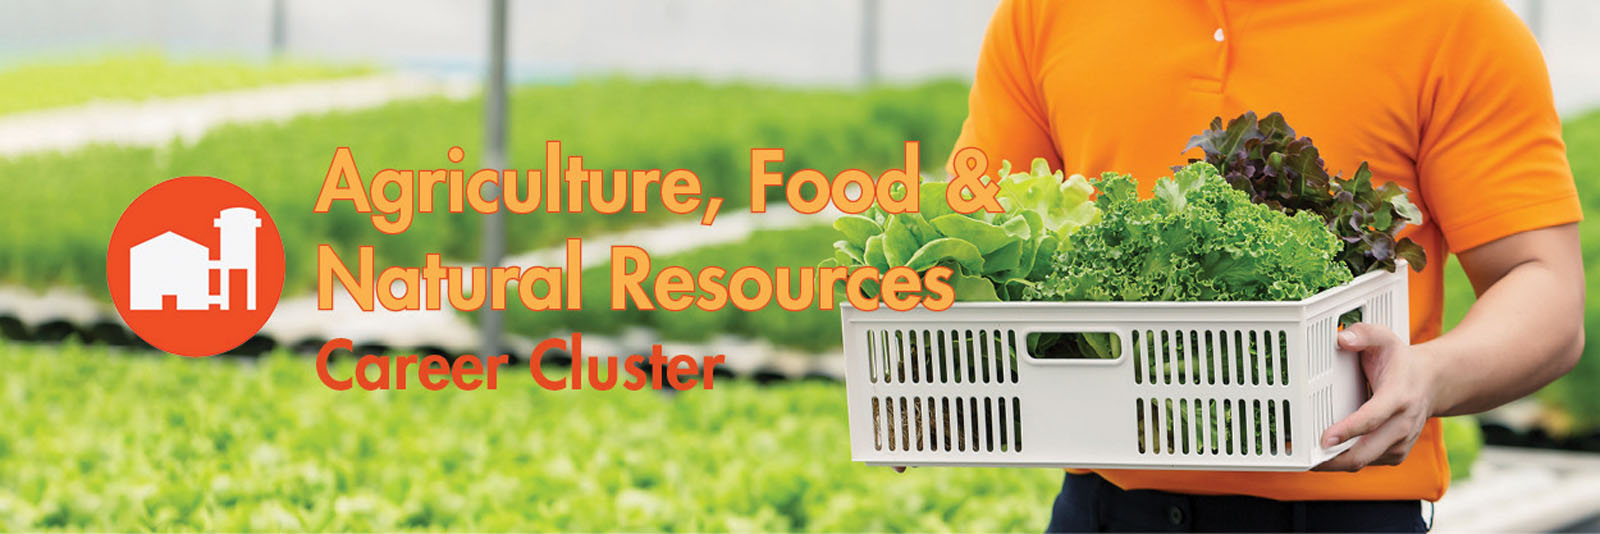 agriculture-food-natural-resources-career-technical-education-cte